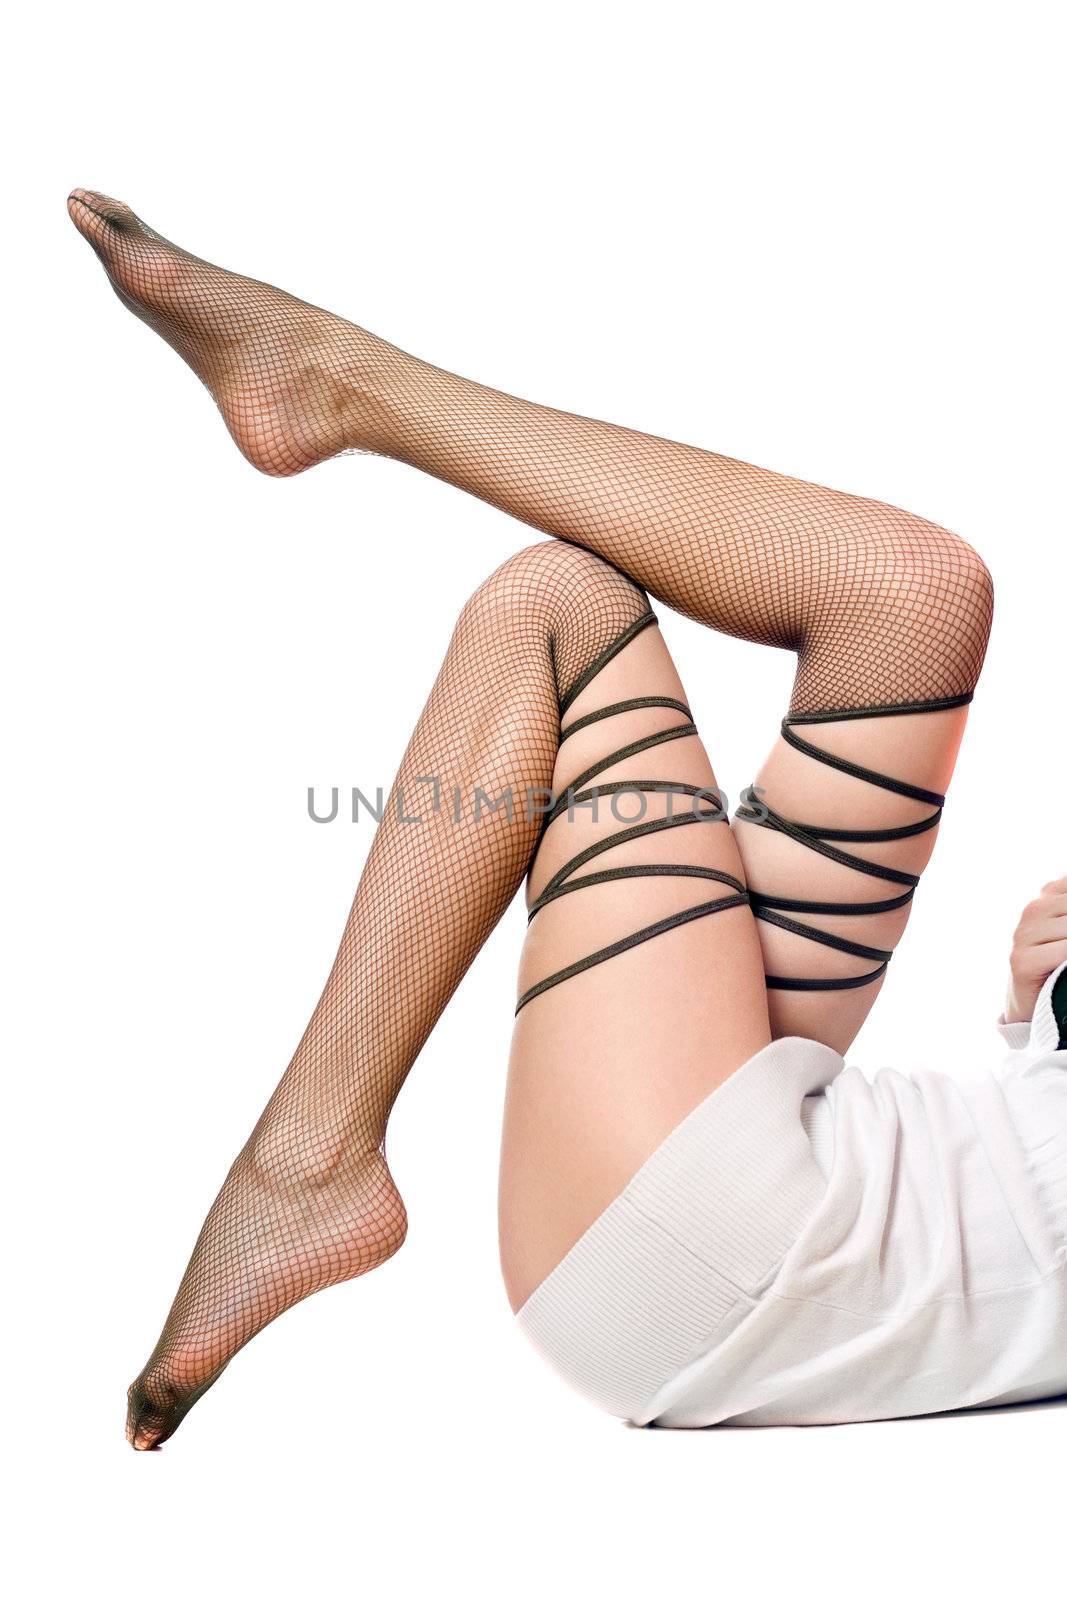 Sexy shapely women's legs in pantyhose. Isolated on white background